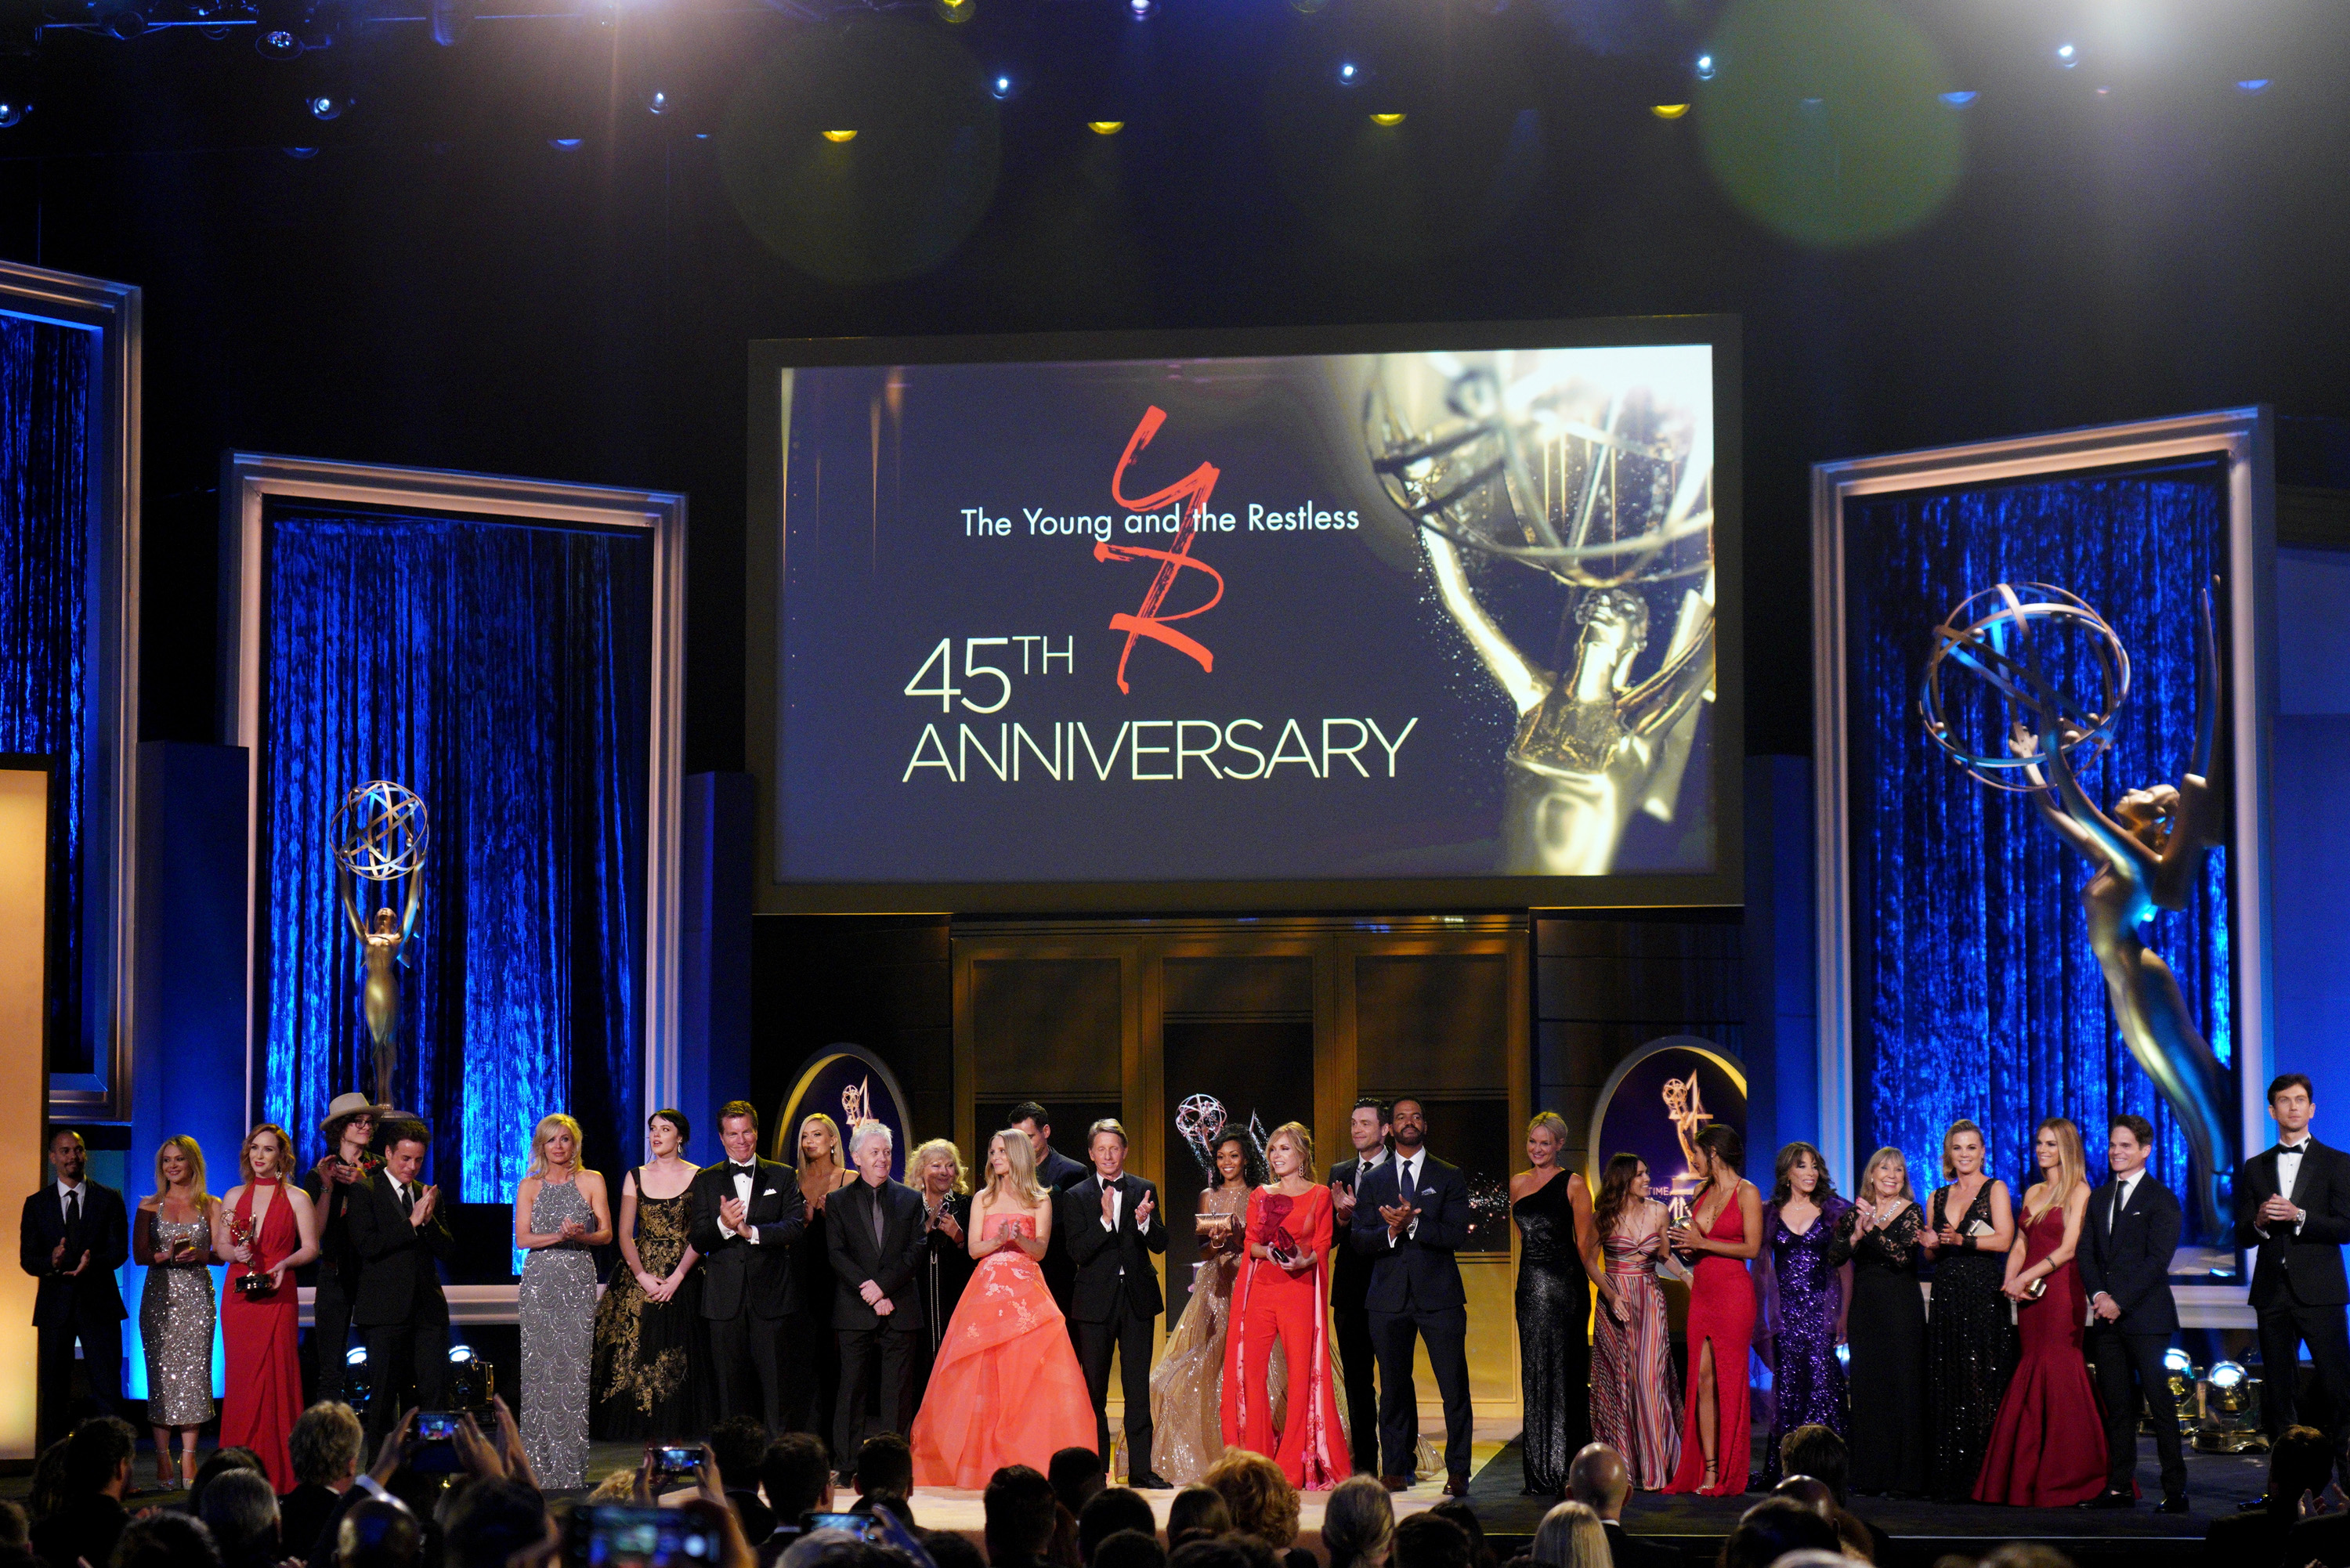 'The Young and the Restless' cast and crew celebrate the soap opera's 45th anniversary at the 2018 Daytime Emmy Awards.